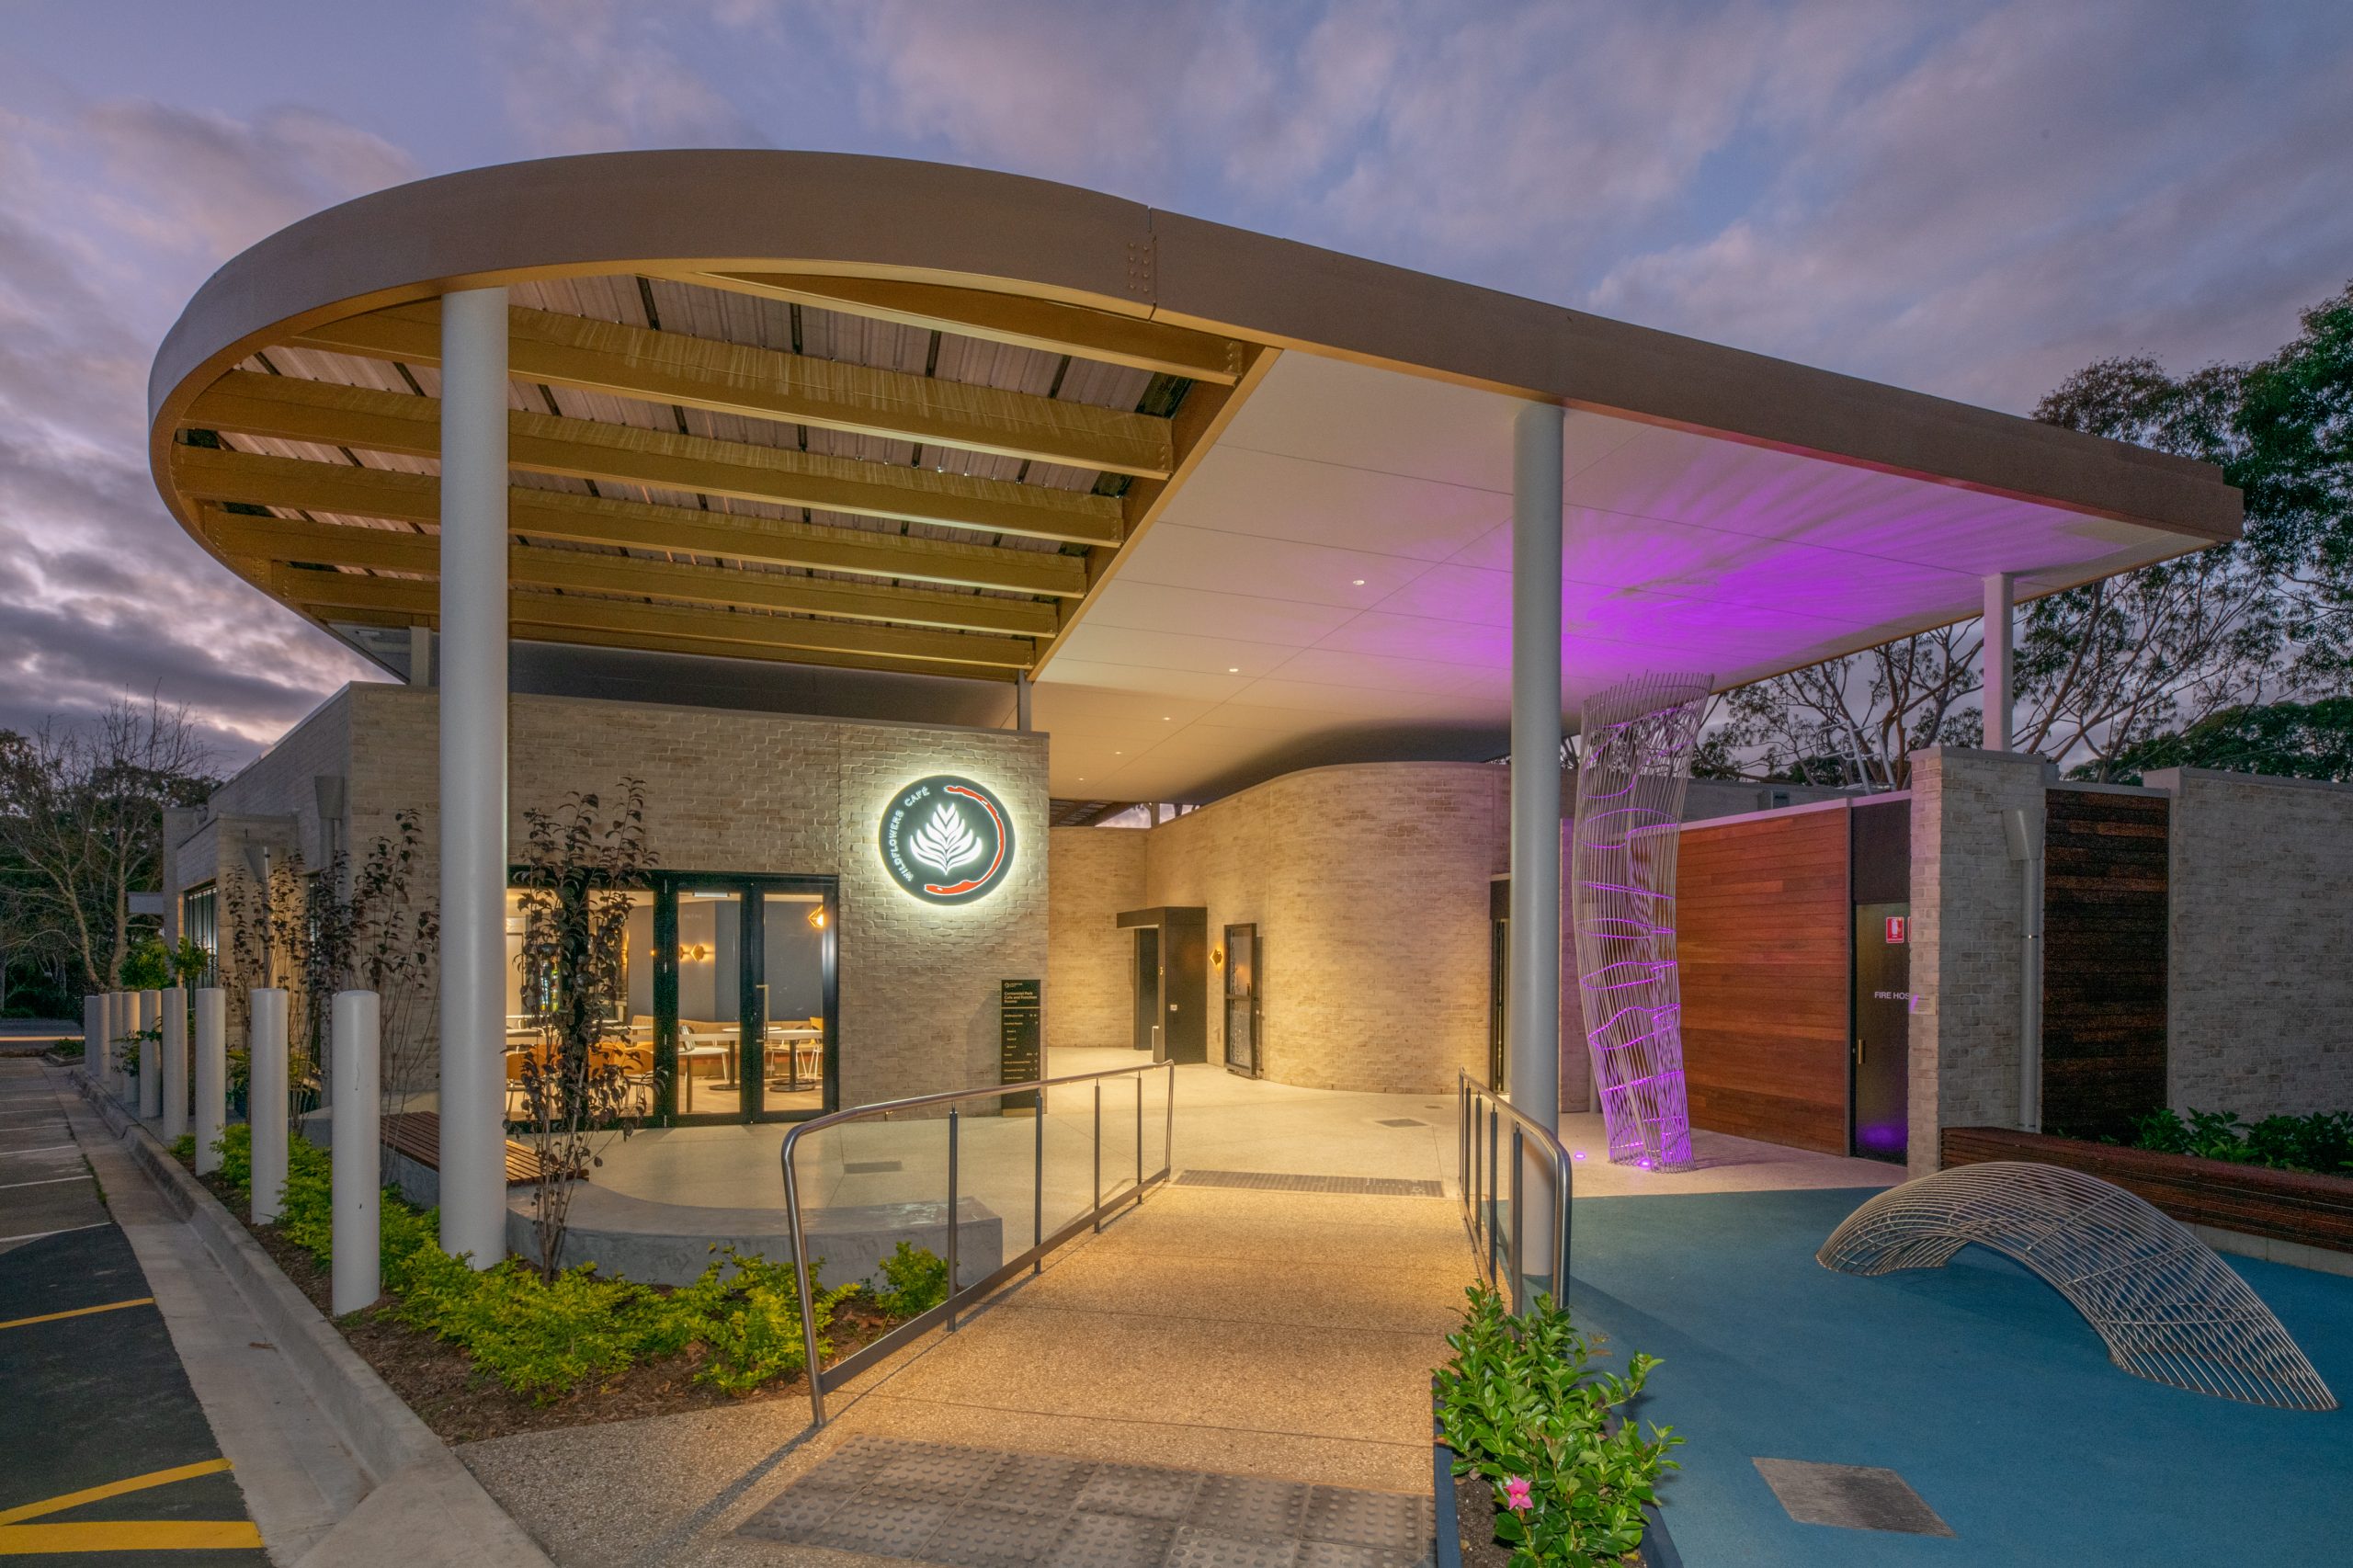 External entrance to the Centennial Park Café & Function Rooms, light up in the evening